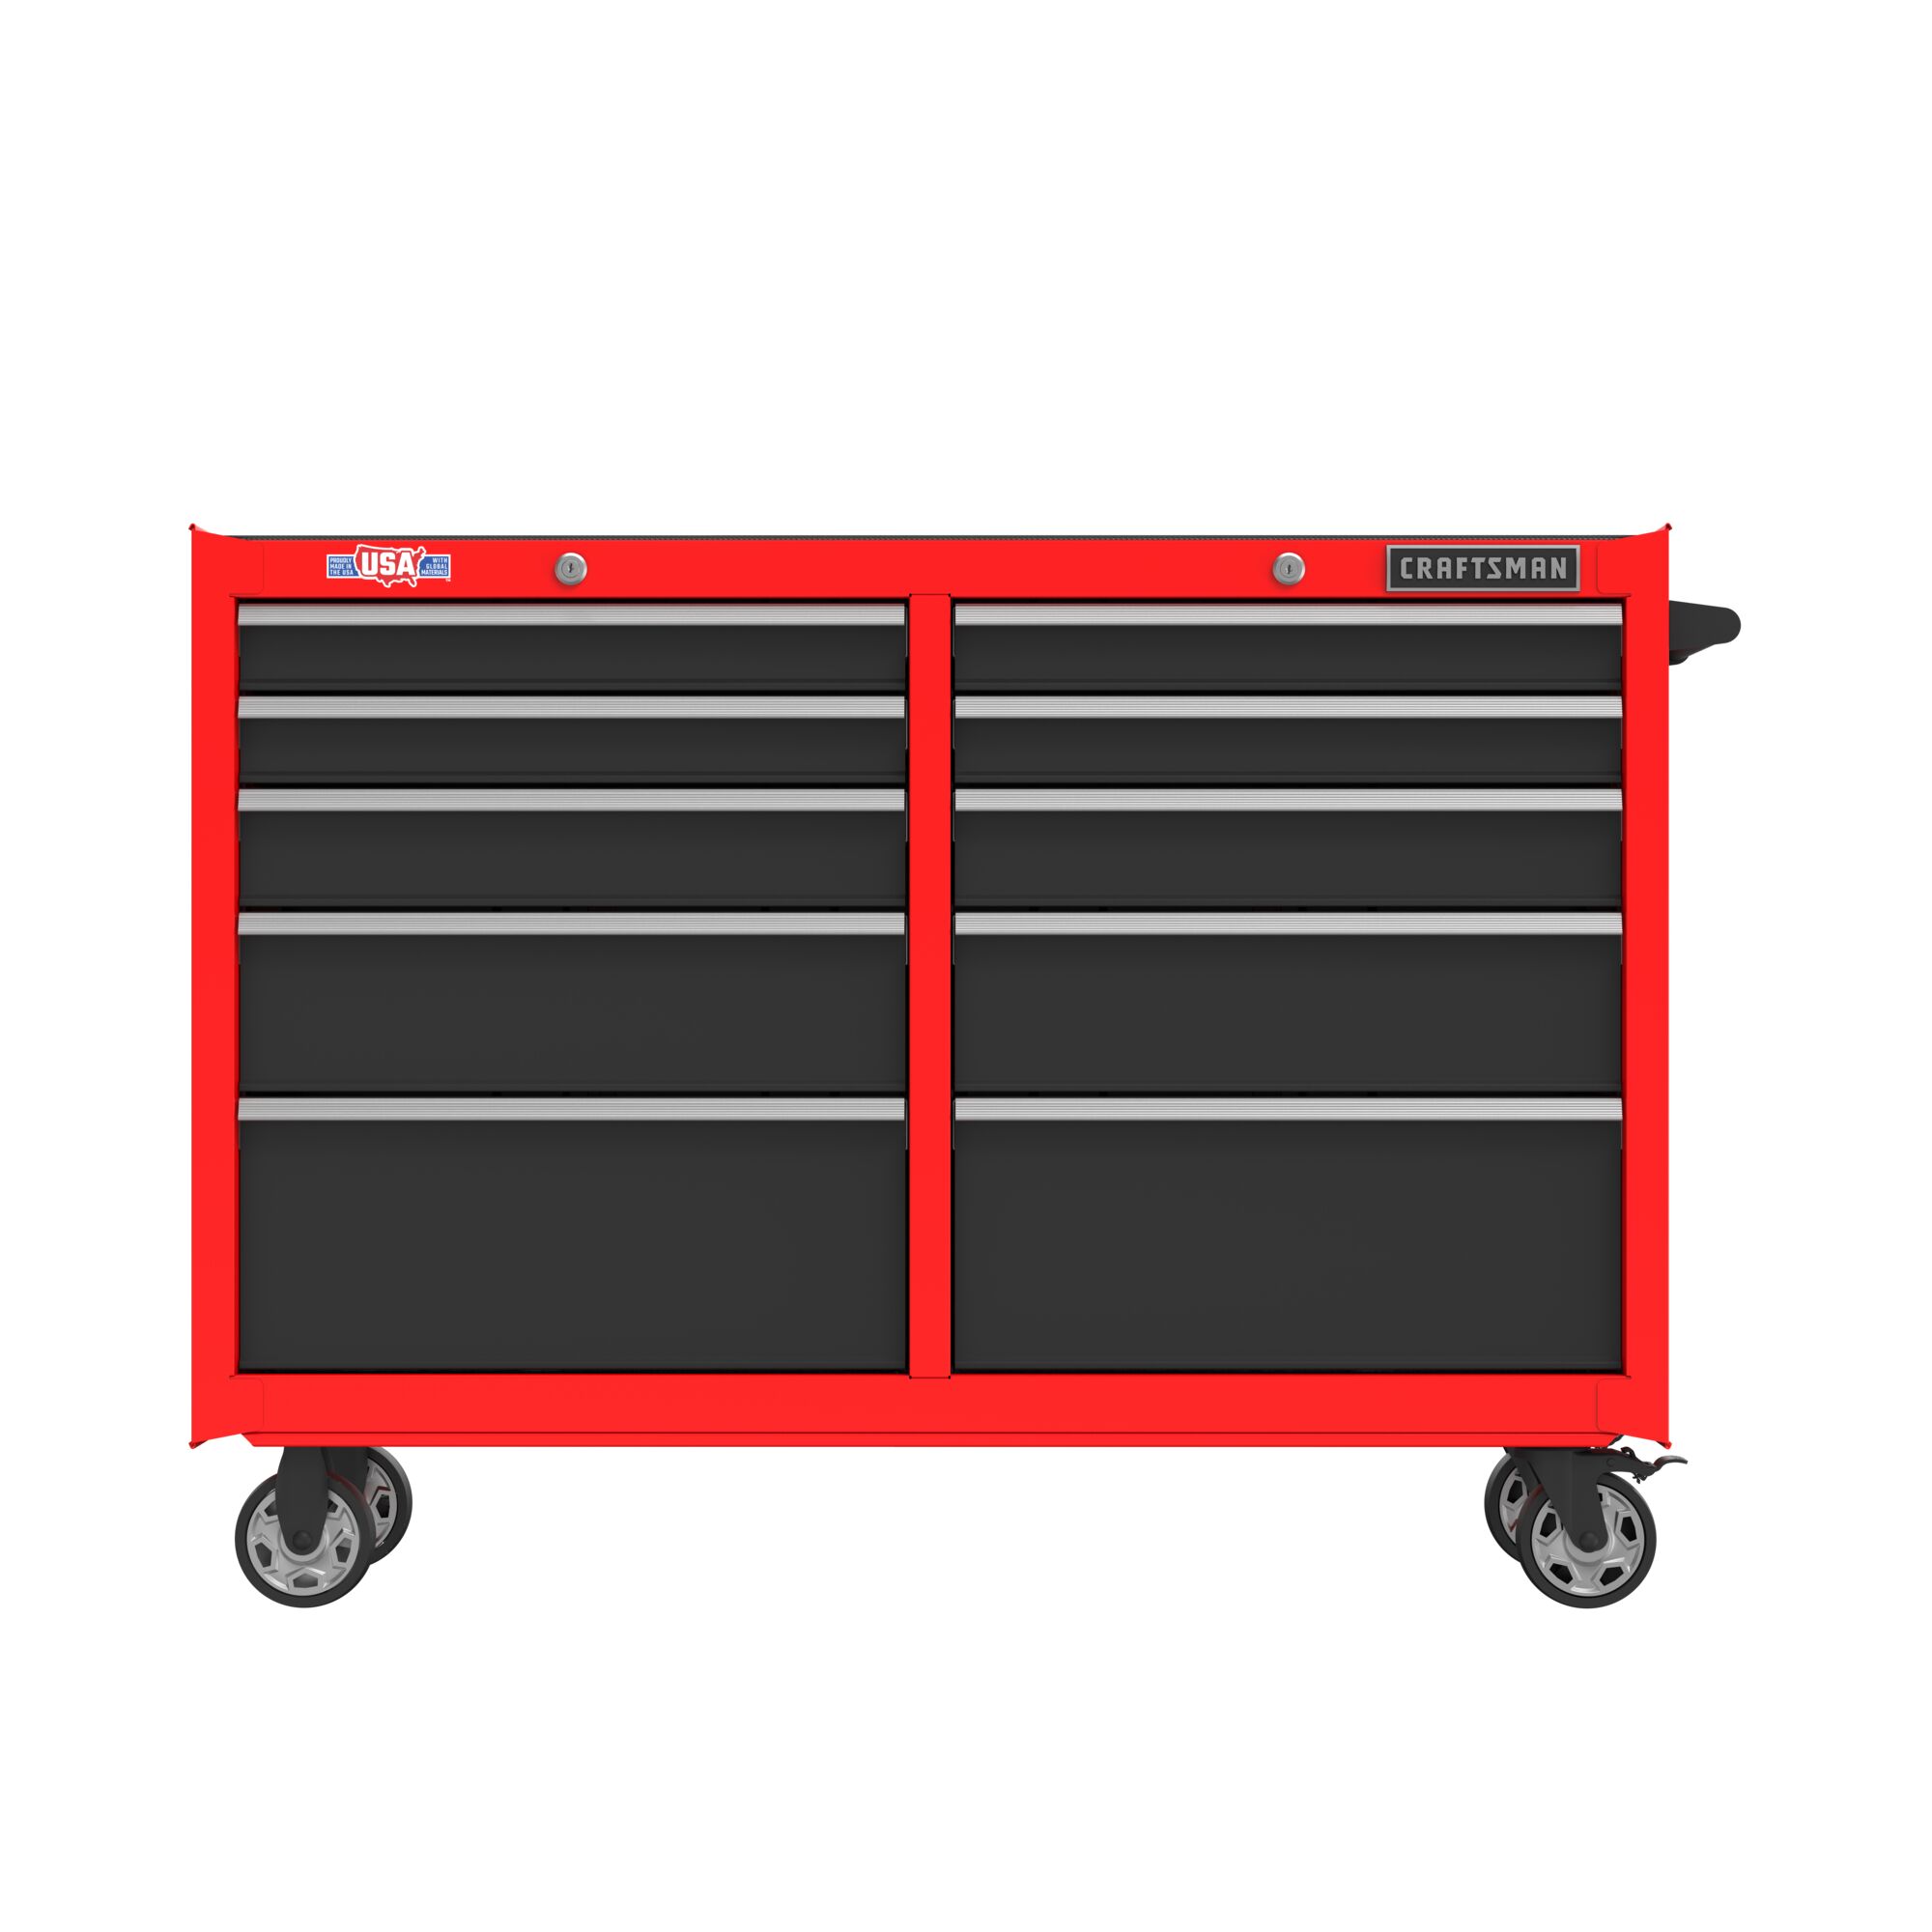 Recharge batteries and electronics feature of 52 inch 10 drawer rolling tool cabinet.